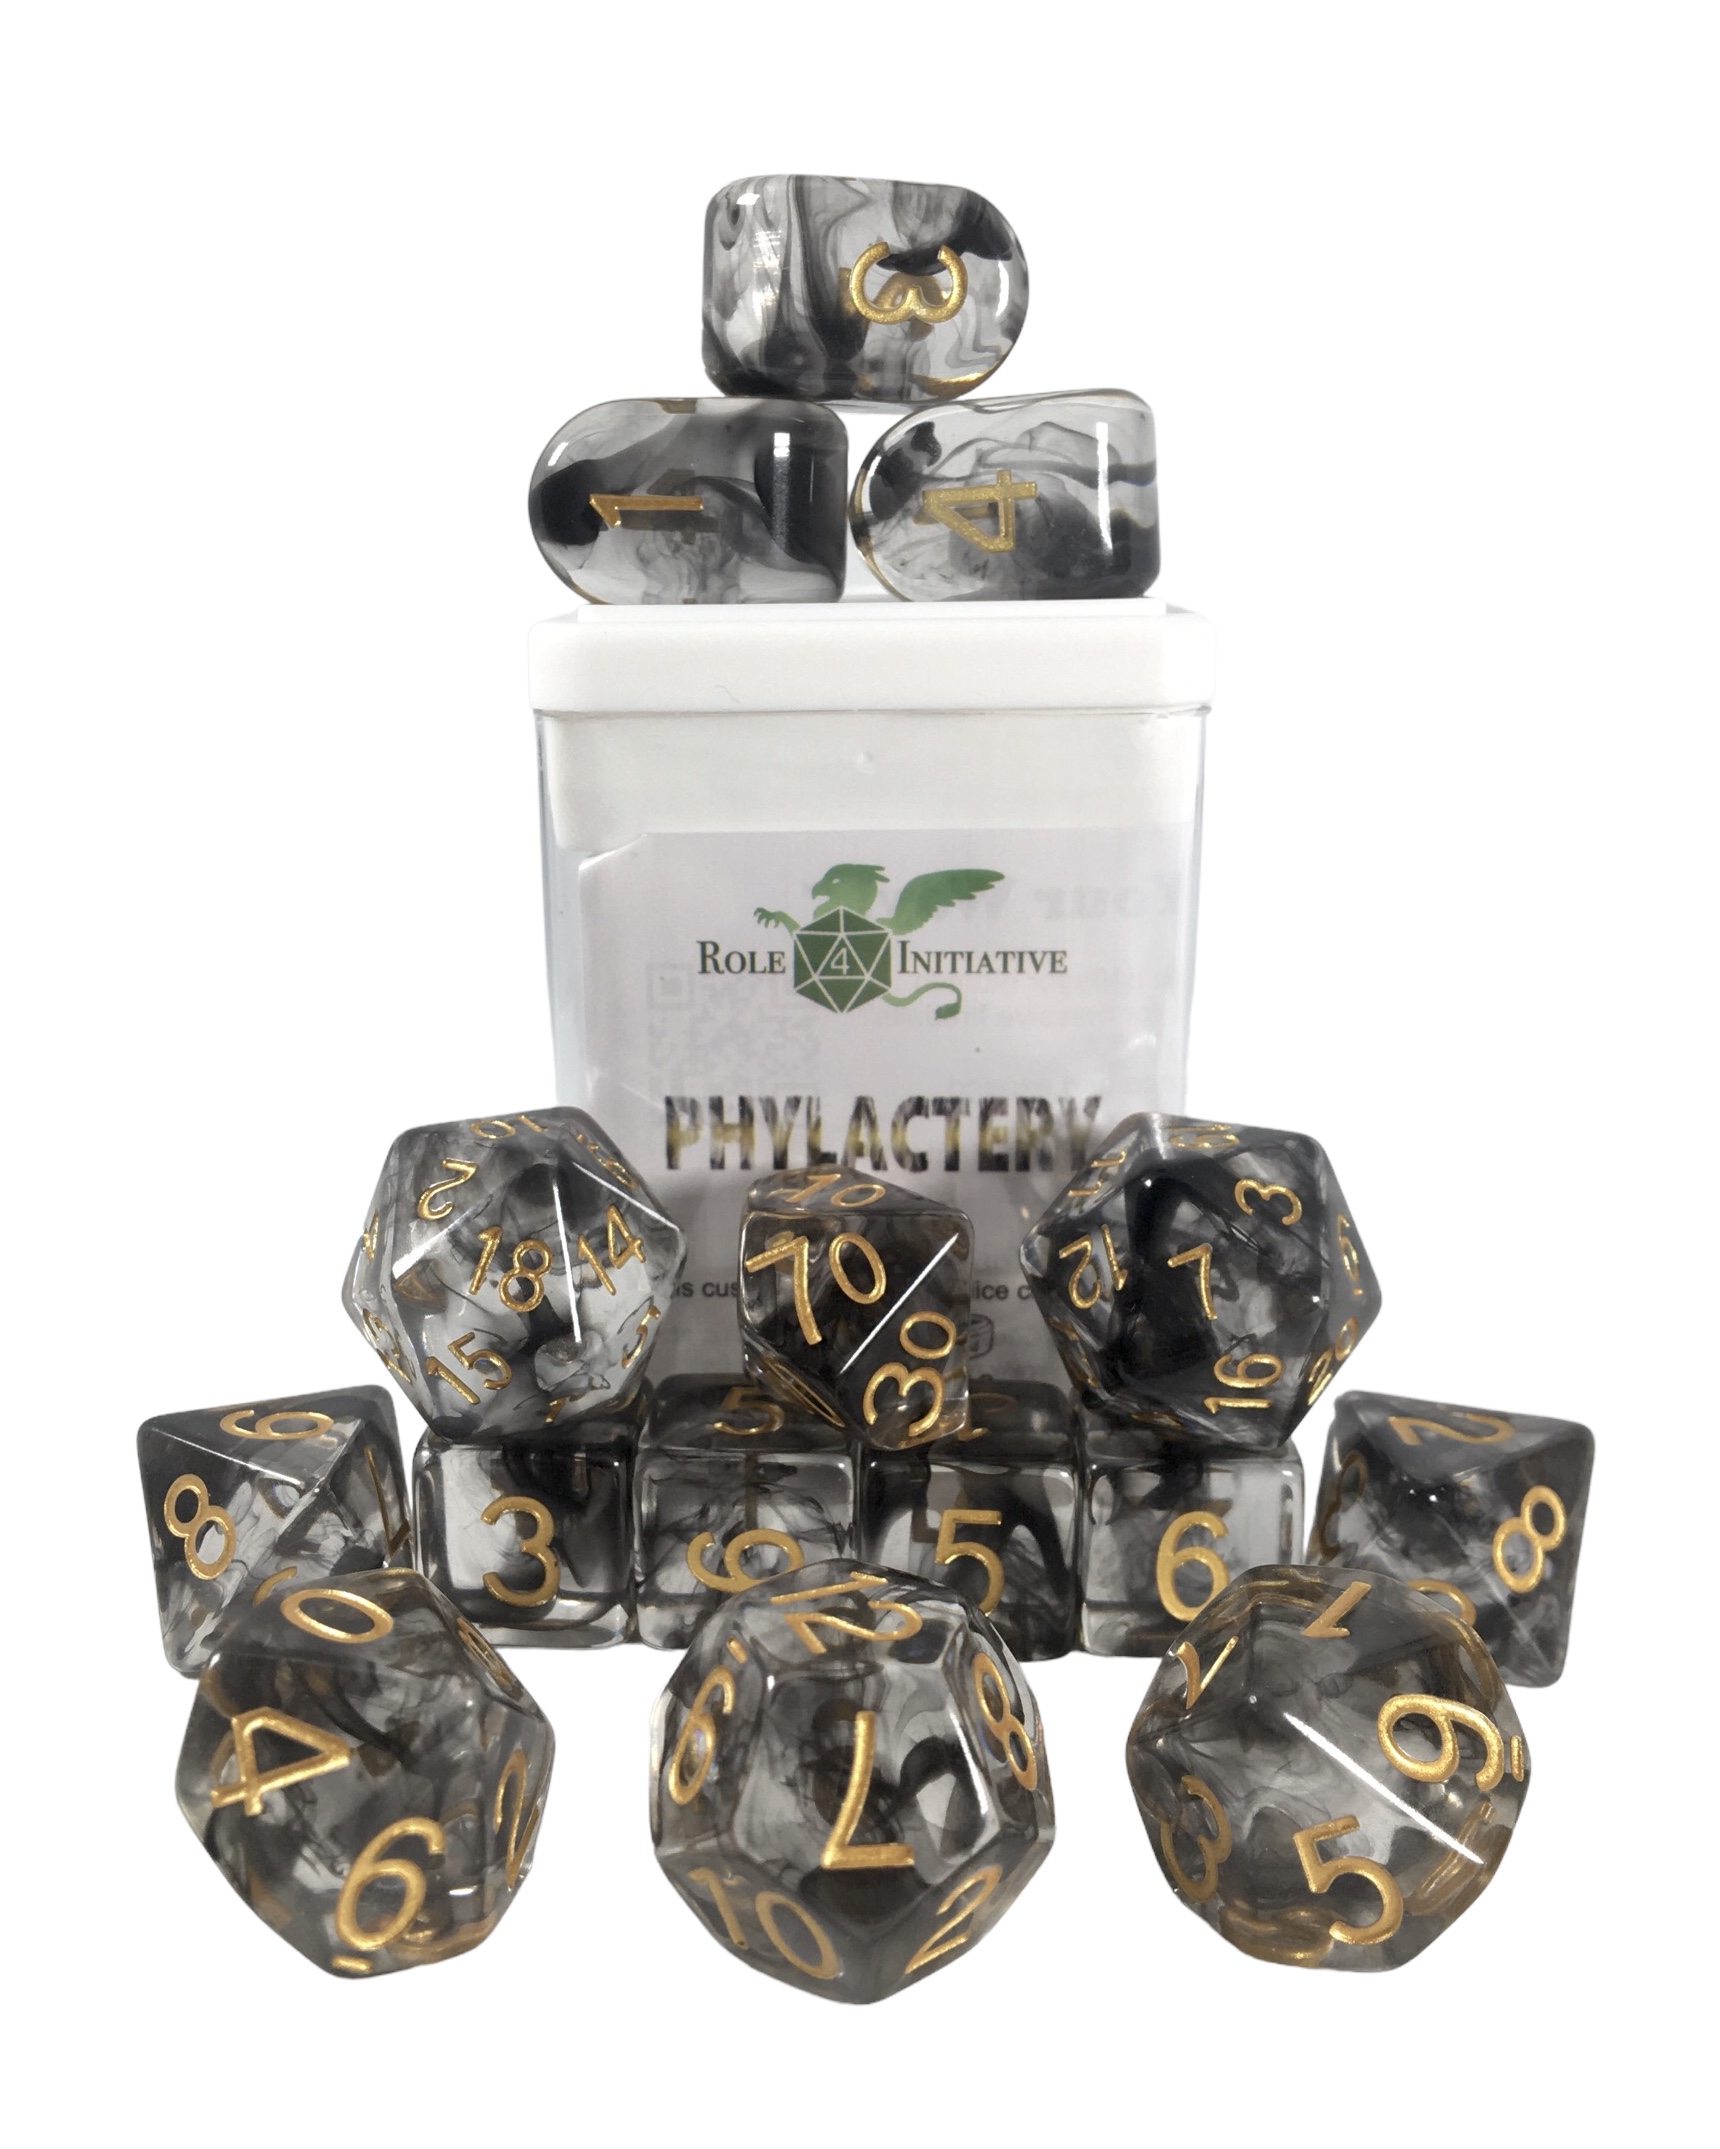 Role 4 Initiative: Polyhedral 15 Dice Set: Diffusion Phylactery Arch D4 